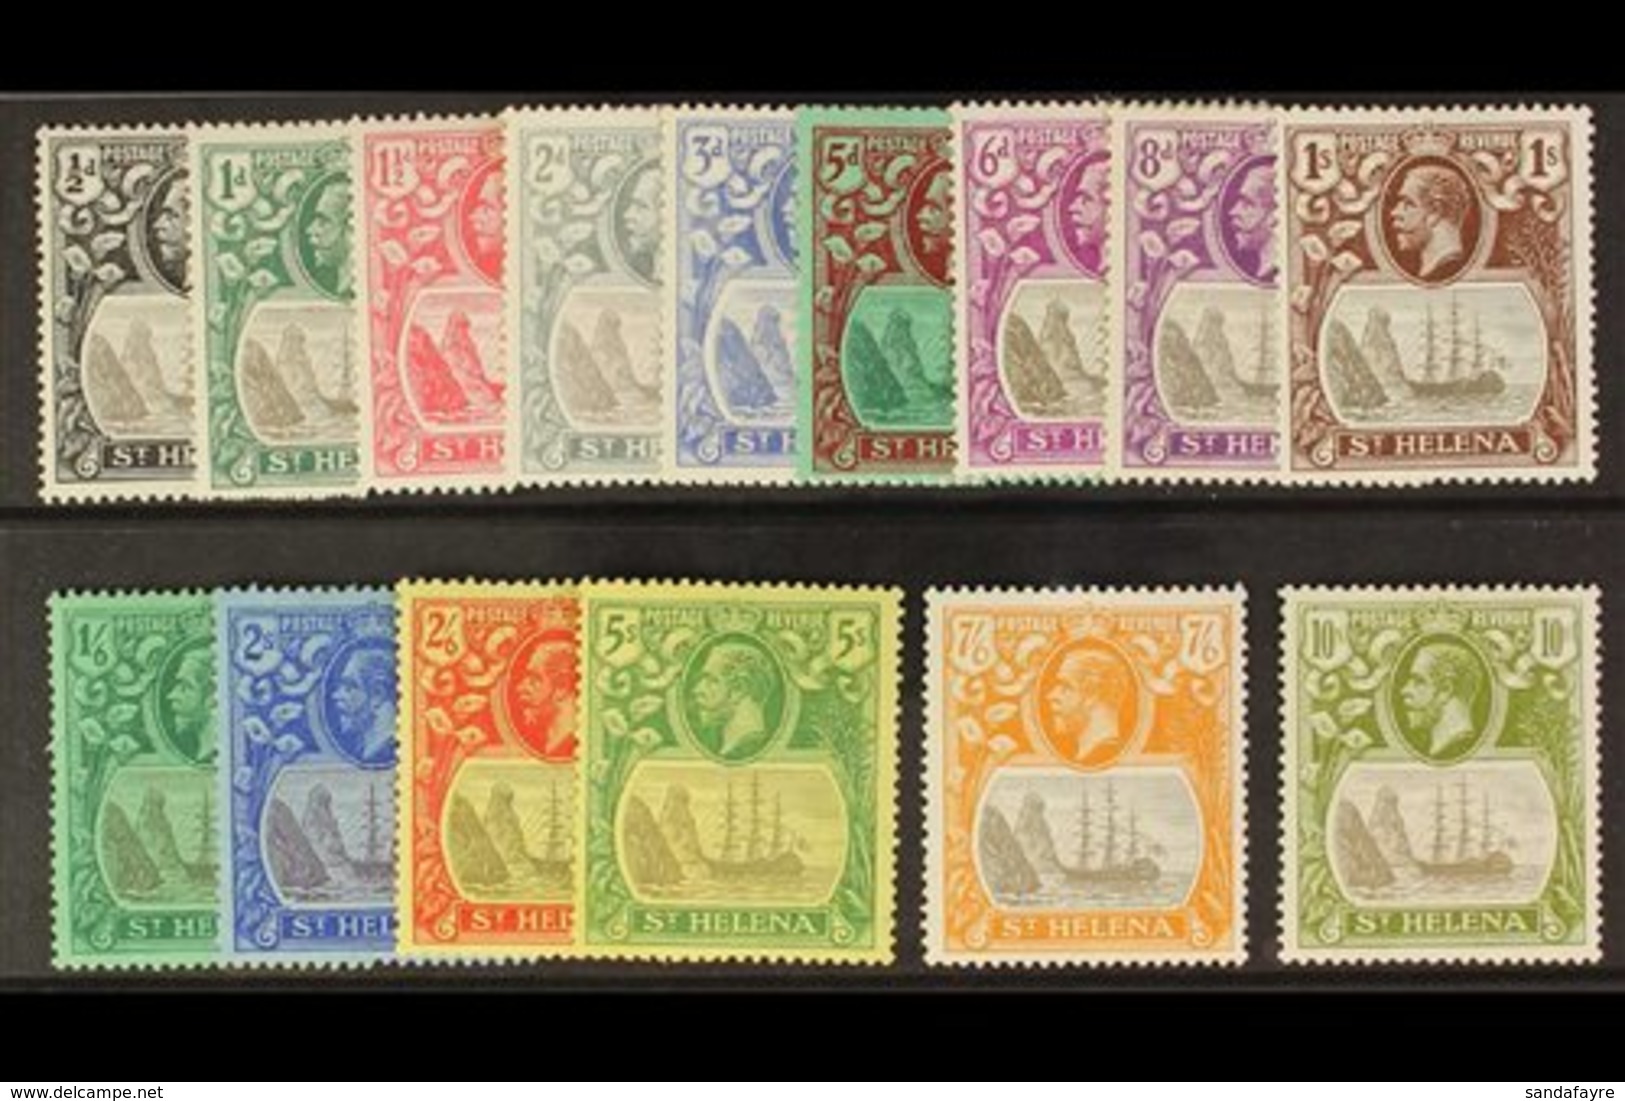 1922-37 "Badge Of St Helena" Watermark Script CA Set Complete From ½d To 10s, SG 97/112, Very Fine Mint. (15 Stamps) For - Saint Helena Island